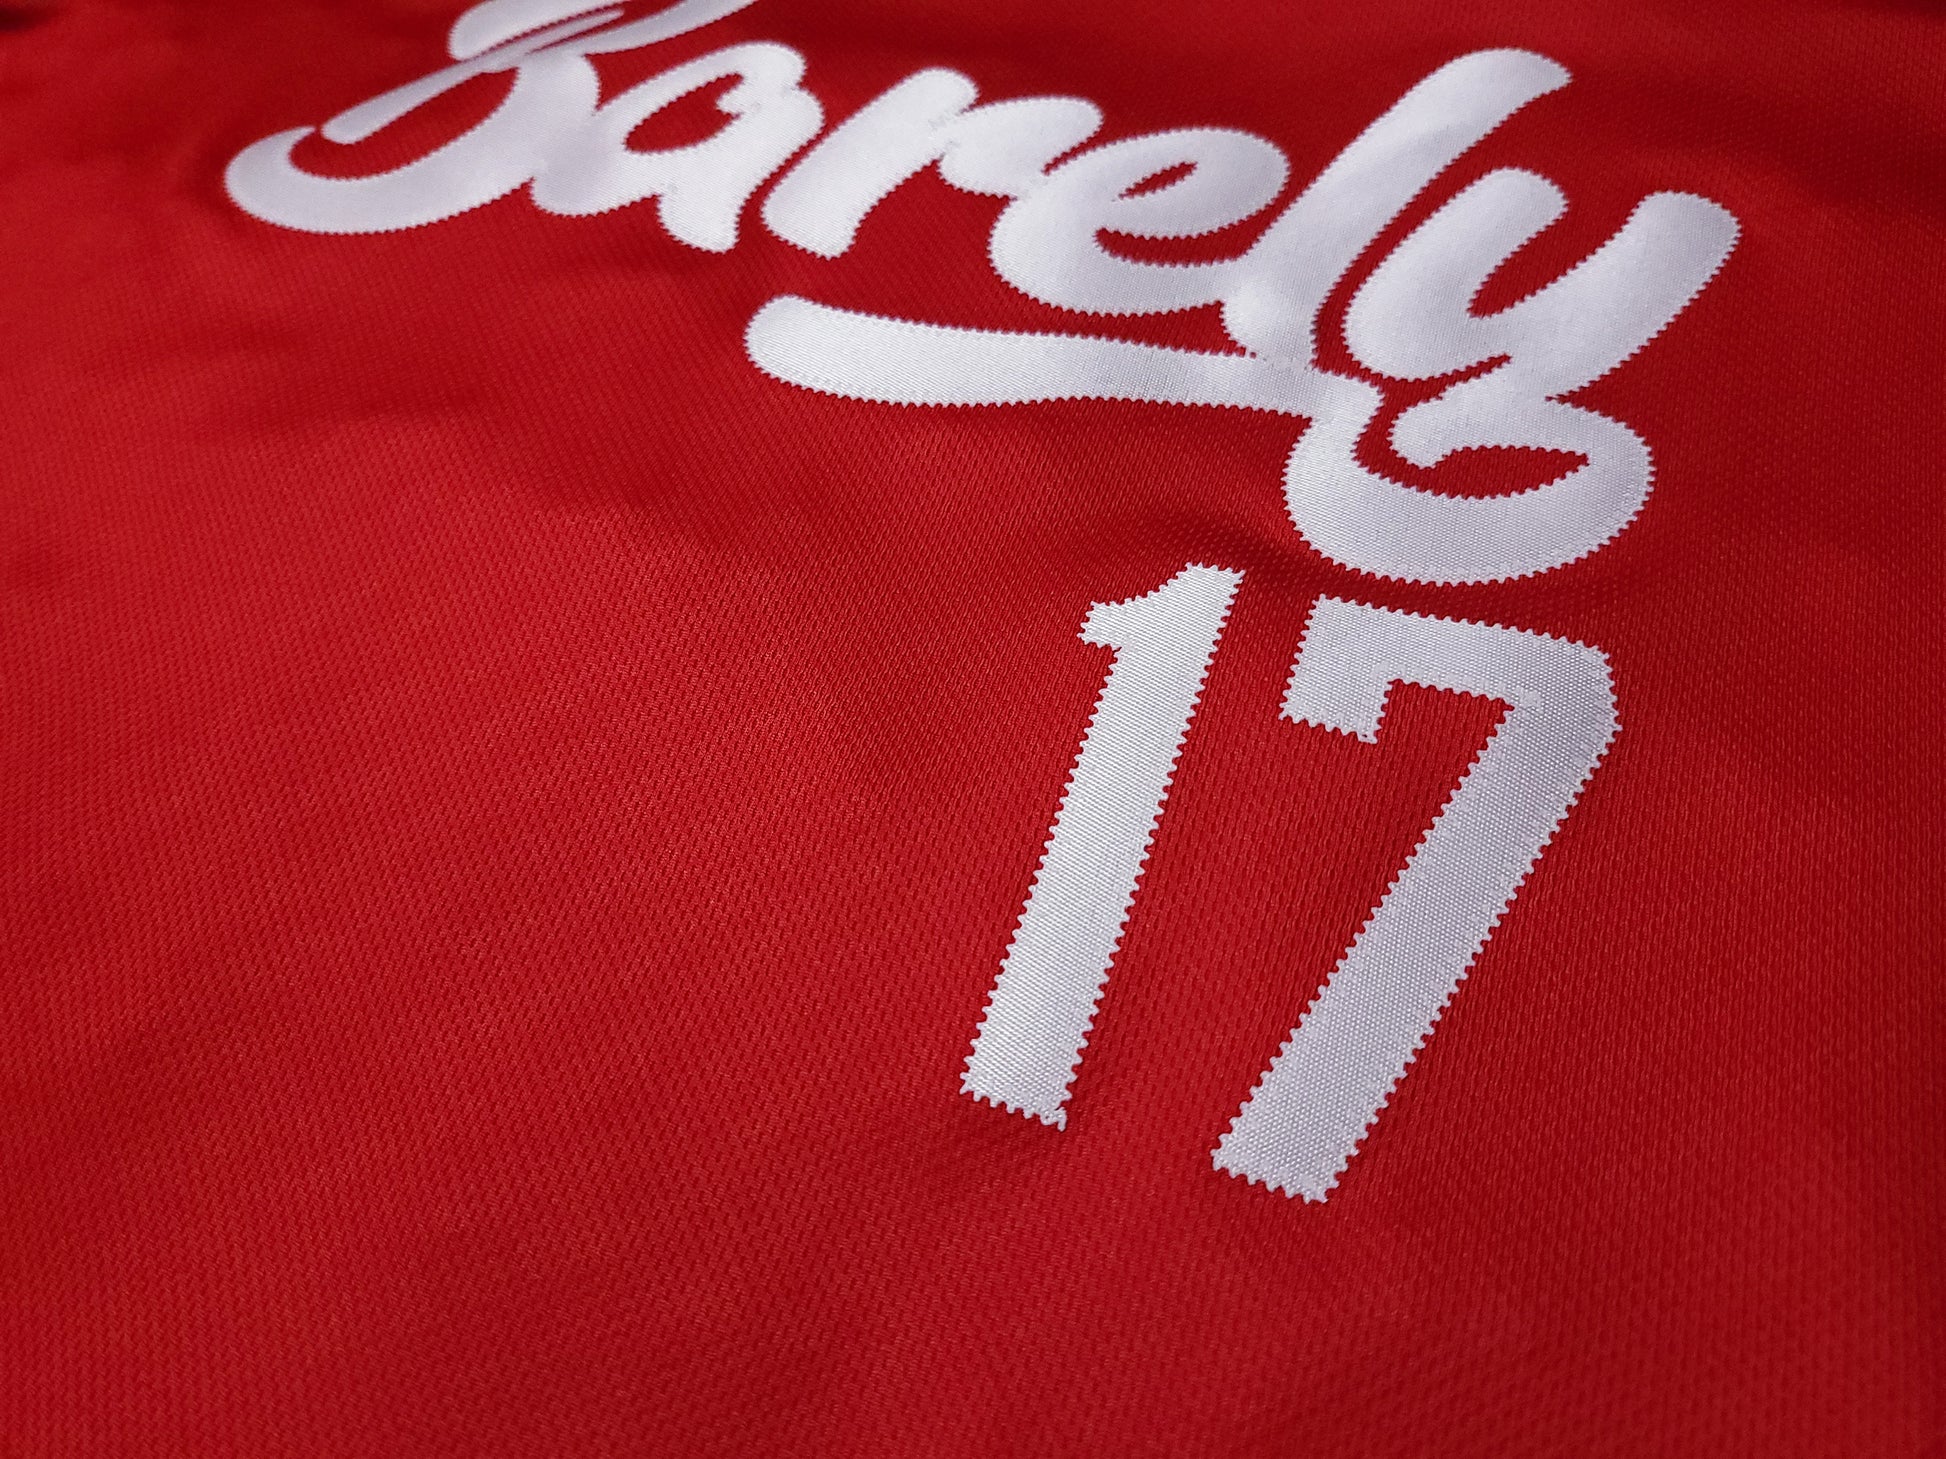 Barely Henley Jersey-(Blk/Red) - Barely Ordinary